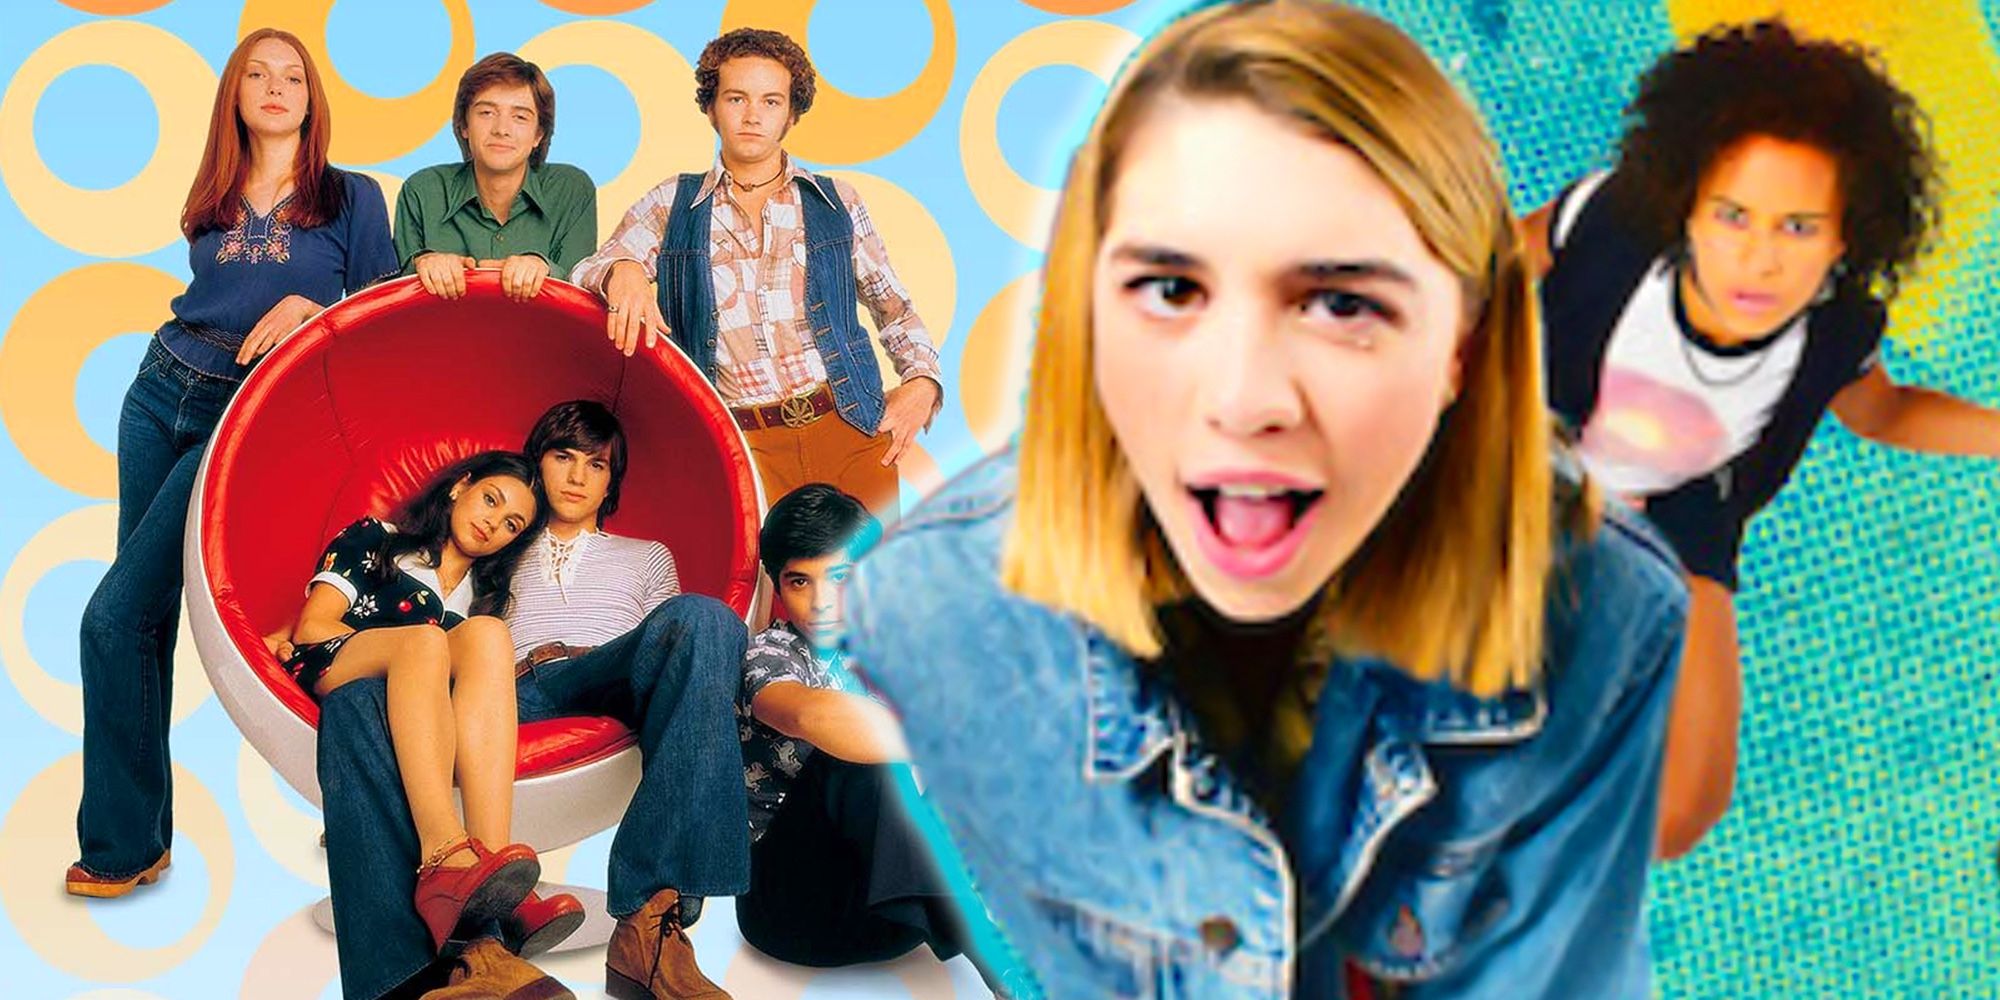 A blended image features the teenagers of That 70s Show and That 90s Show